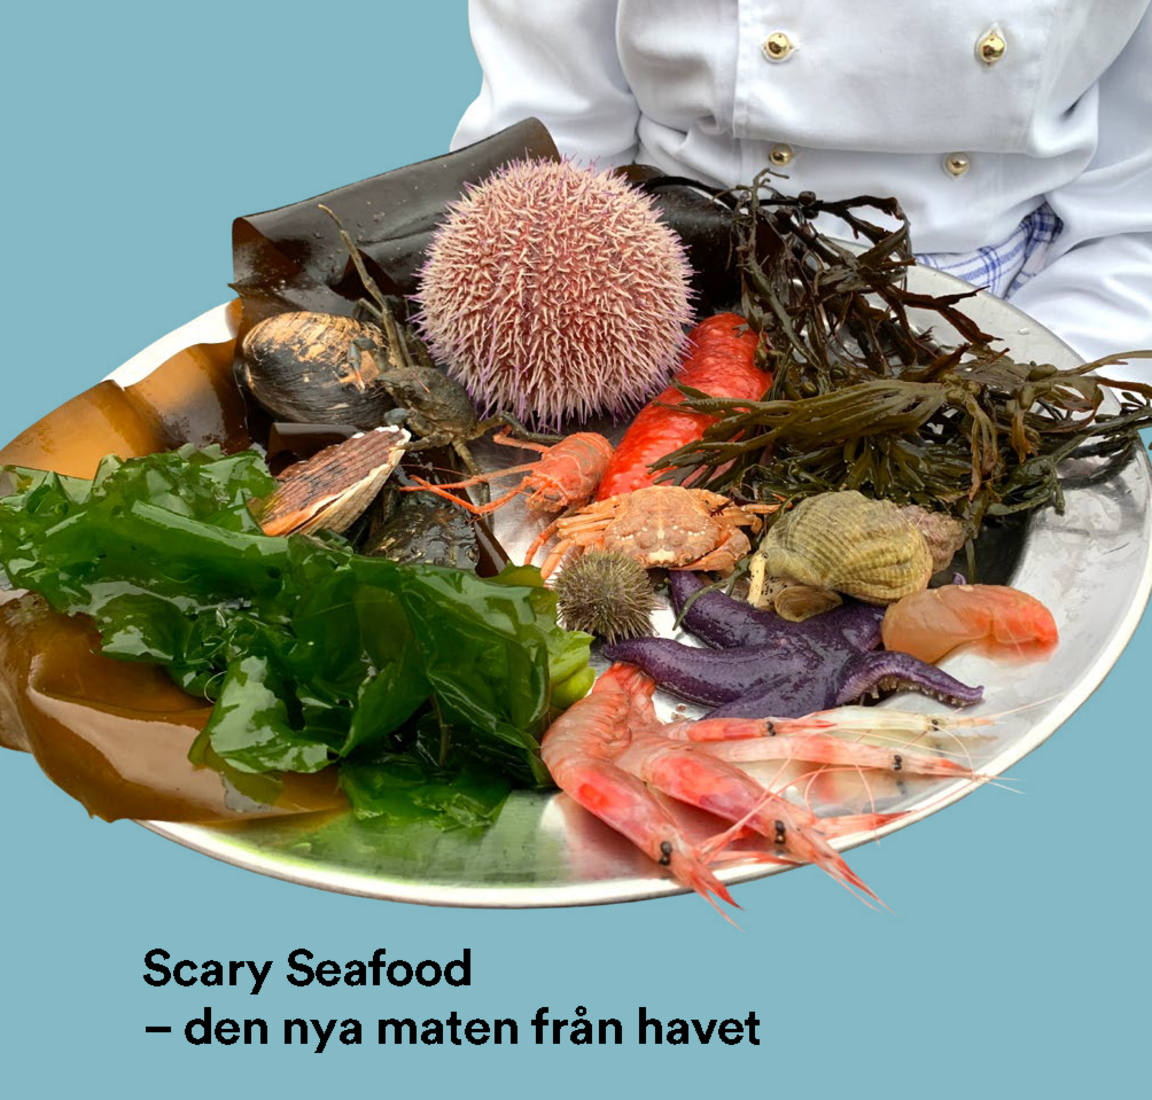 Scary Seafood rapporten